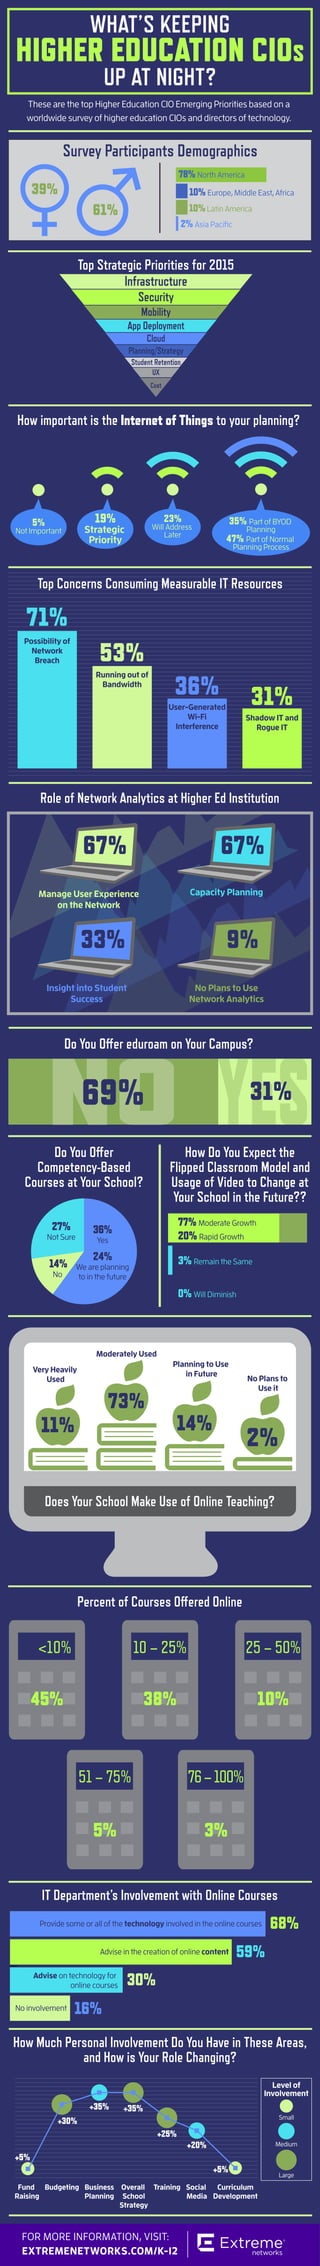 These are the top Higher Education CIO Emerging Priorities based on a
worldwide survey of higher education CIOs and directors of technology.
WHAT’S KEEPING
HIGHER EDUCATION CIOS
UP AT NIGHT?
39%
61%
78% North America
10%Latin America
10% Europe, Middle East, Africa
2% Asia Paciﬁc
Survey Participants Demographics
How important is the Internet of Things to your planning?
Top Concerns Consuming Measurable IT Resources
Role of Network Analytics at Higher Ed Institution
Do You Offer eduroam on Your Campus?
Do You Offer
Competency-Based
Courses at Your School?
How Do You Expect the
Flipped Classroom Model and
Usage of Video to Change at
Your School in the Future??
Top Strategic Priorities for 2015
Infrastructure
Security
Mobility
App Deployment
Cloud
Planning/Strategy
Student Retention
UX
Cost
5%
Not Important
19%
Strategic
Priority
23%
Will Address
Later
35% Part of BYOD
Planning
47% Part of Normal
Planning Process
Possibility of
Network
Breach
71%
Running out of
Bandwidth
53%
User-Generated
Wi-Fi
Interference
36%
Shadow IT and
Rogue IT
31%
67%
Manage User Experience
on the Network
67%
Capacity Planning
33%
Insight into Student
Success
9%
No Plans to Use
Network Analytics
NO69%
YES31%
27%
Not Sure
14%
No
36%
Yes
24%
We are planning
to in the future
3% Remain the Same
0% Will Diminish
73%
77% Moderate Growth
20% Rapid Growth
Moderately Used
Planning to Use
in Future
No Plans to
Use it
Does Your School Make Use of Online Teaching?
Percent of Courses Offered Online
IT Department’s Involvement with Online Courses
How Much Personal Involvement Do You Have in These Areas,
and How is Your Role Changing?
11% 14%
2%
Very Heavily
Used
<10%
45%
51 – 75%
5%
76–100%
3%
10 – 25%
38%
25 – 50%
10%
Provide some or all of the technology involved in the online courses
Advise in the creation of online content
Advise on technology for
online courses
Level of
Involvement
No involvement
68%
59%
30%
16%
Small
Medium
Large
FOR MORE INFORMATION, VISIT:
EXTREMENETWORKS.COM/K-12
Fund
Raising
Overall
School
Strategy
+5%
+5%
+35%
Budgeting
+30%
Business
Planning
+35%
Training
+25%
Curriculum
Development
Social
Media
+20%
 